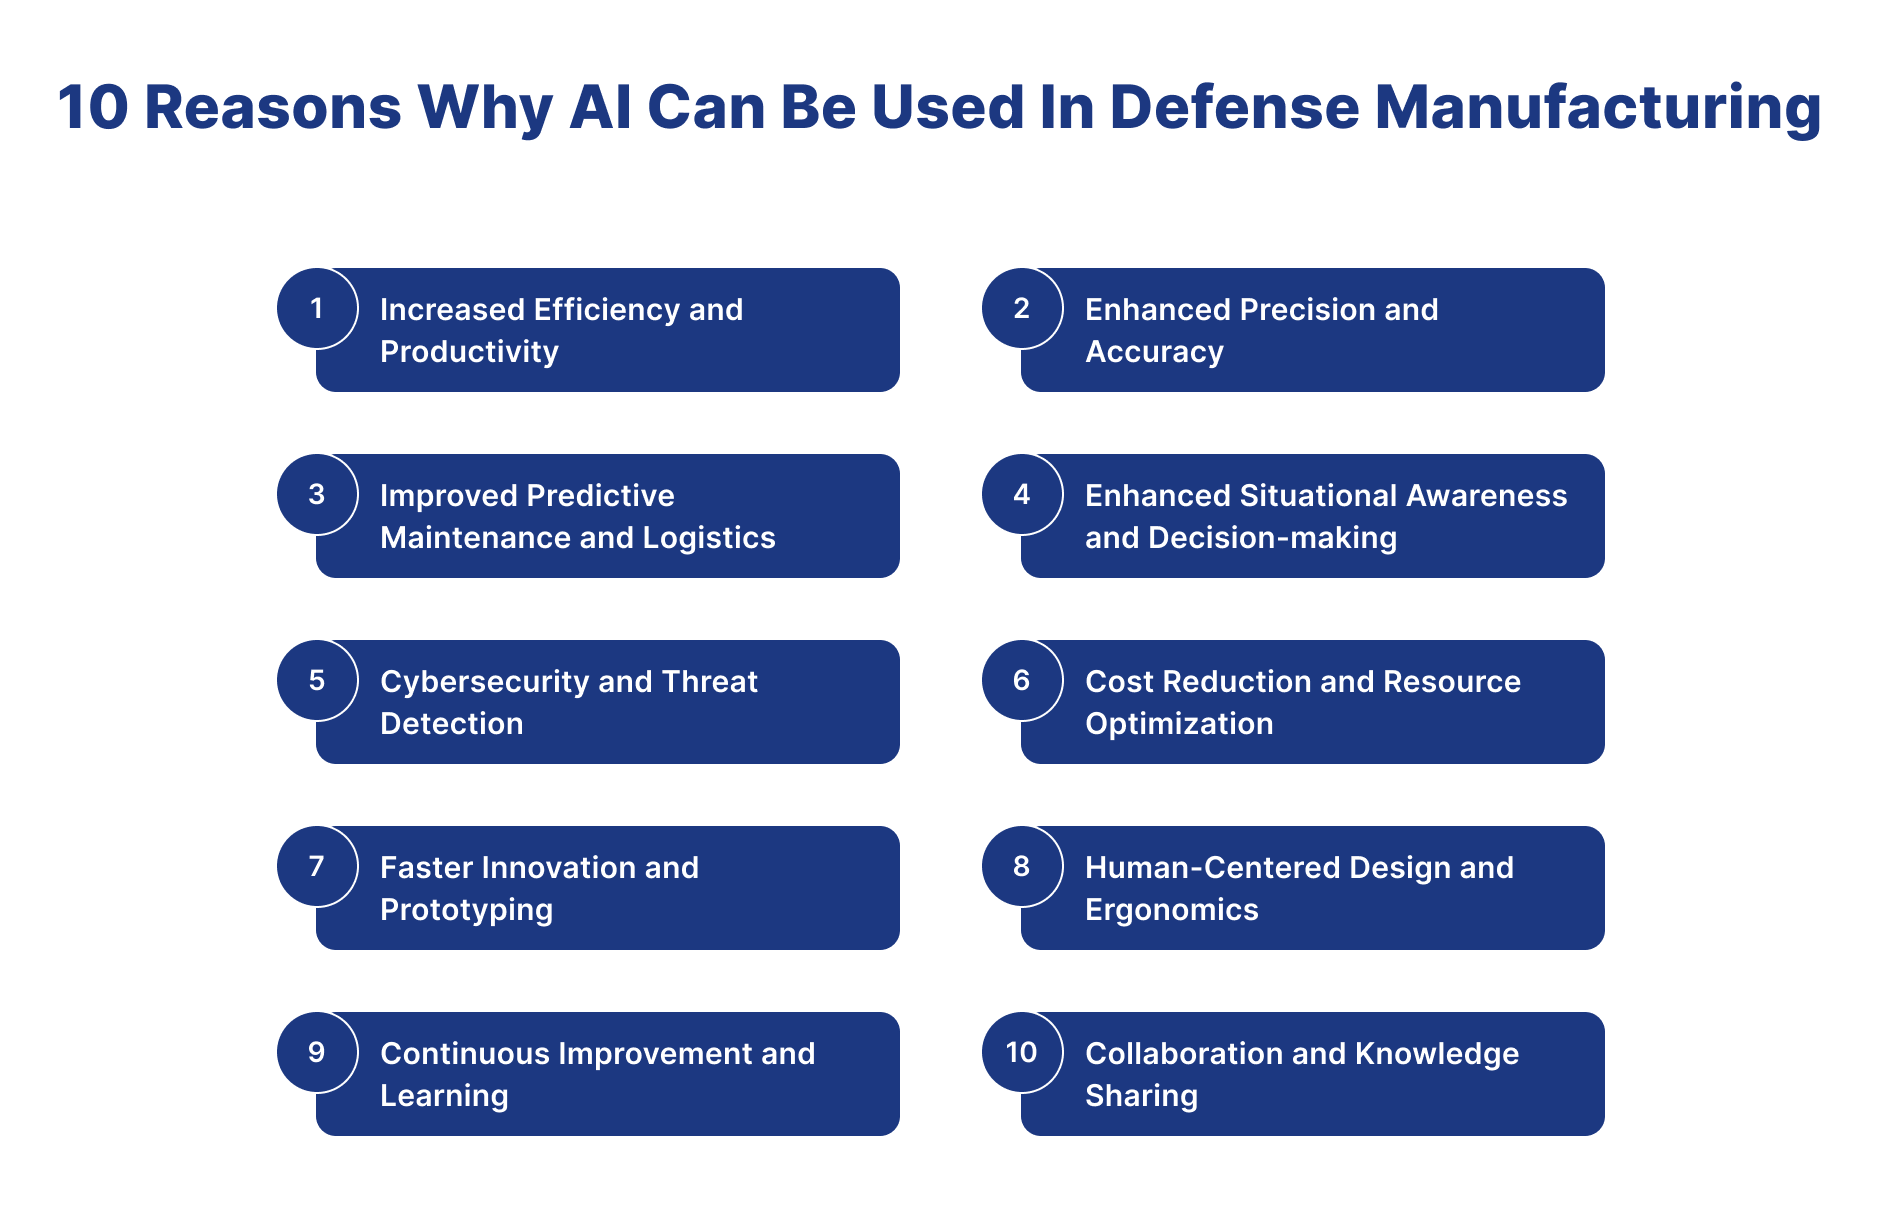 AI Can Be Used In Defense Manufacturing